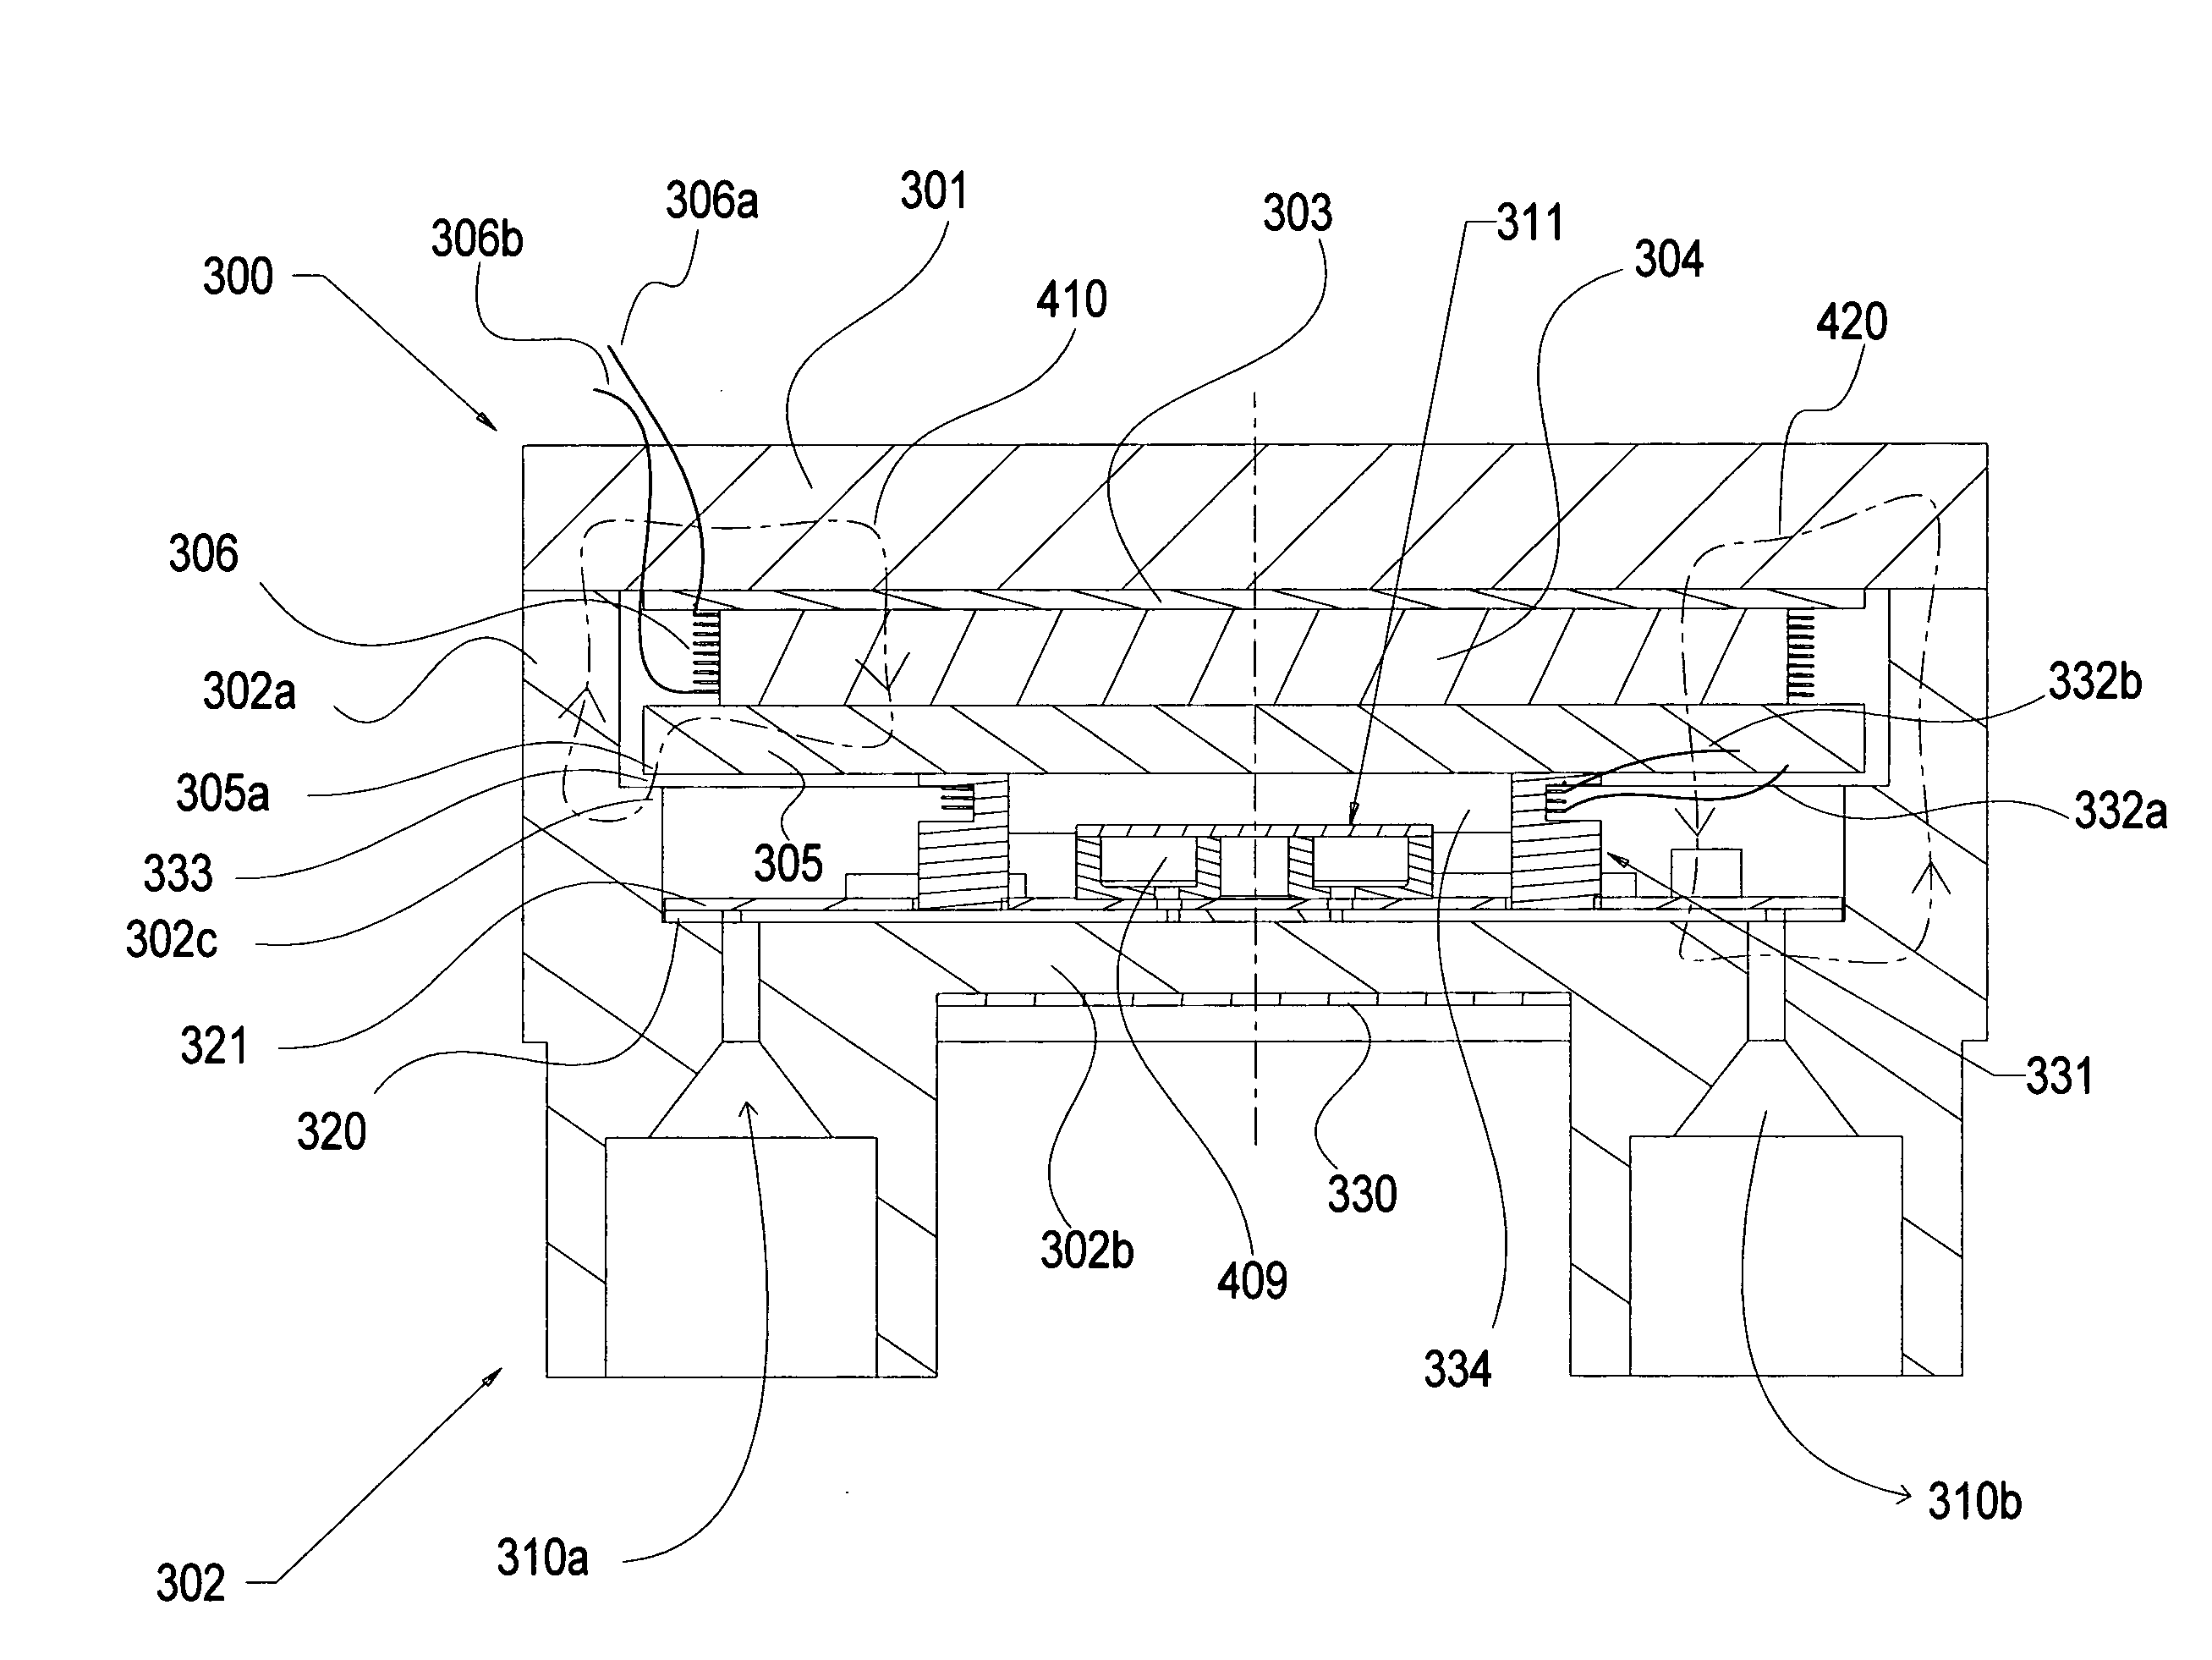 Method of and apparatus for in-situ measurement of changes in fluid composition by electron spin resonance (ESR) spectrometry